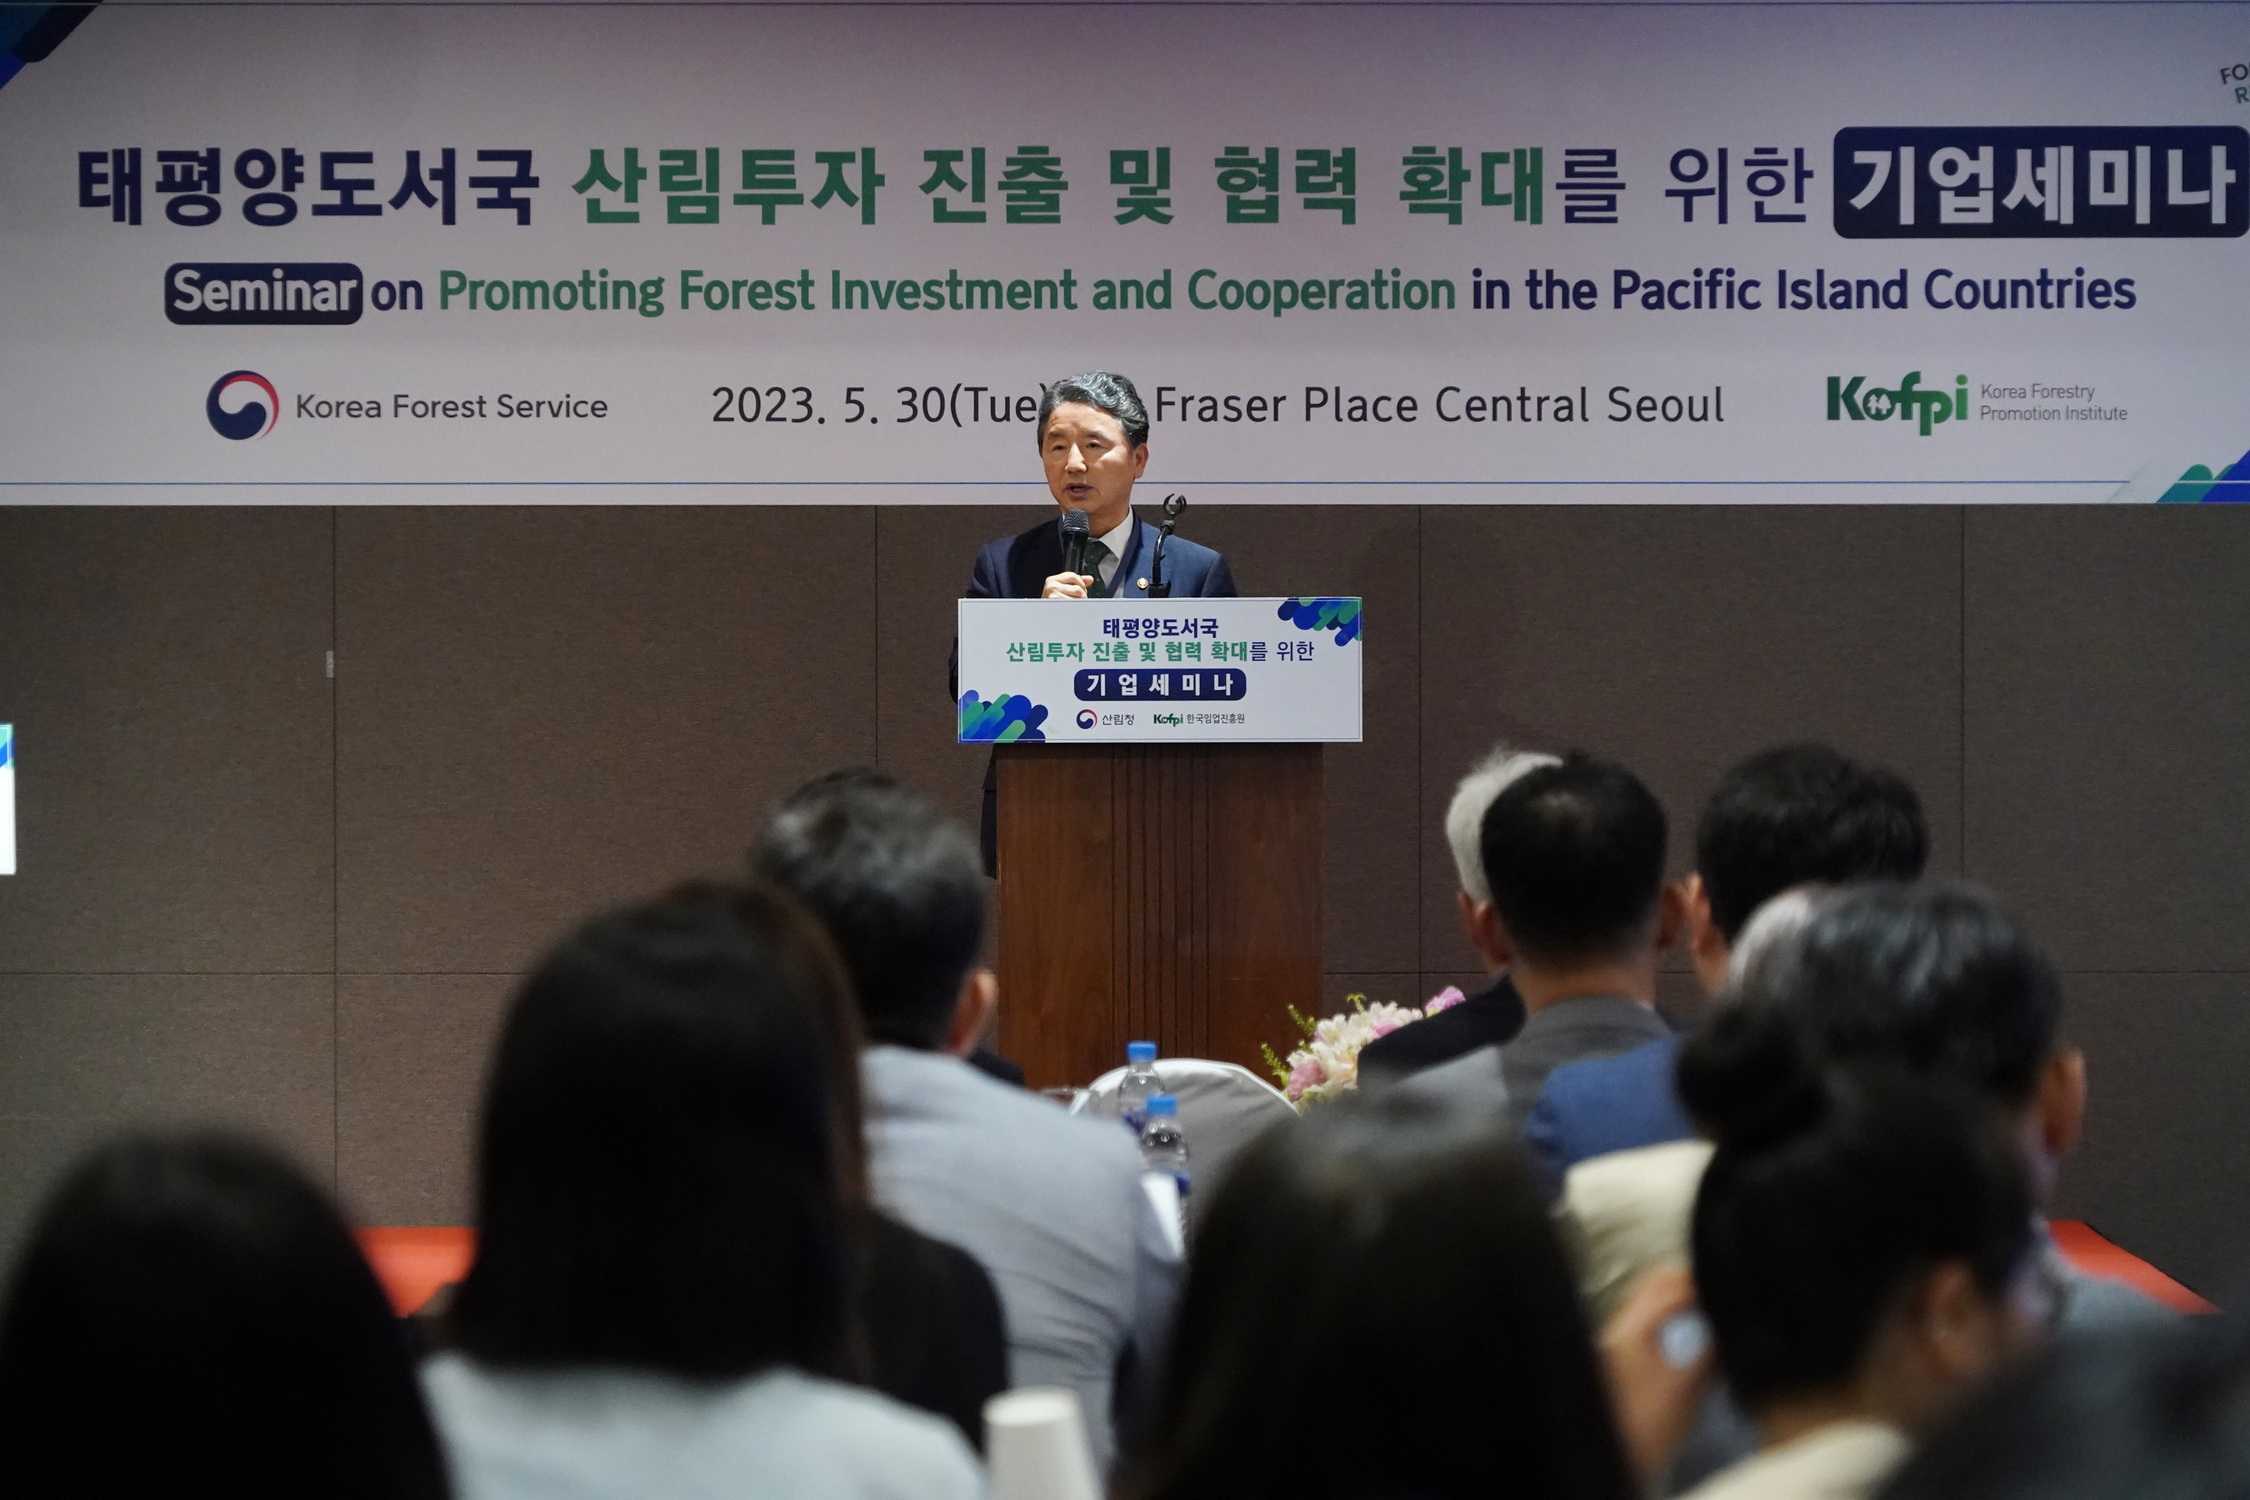 Seminar promoting corporate forest investment 이미지2